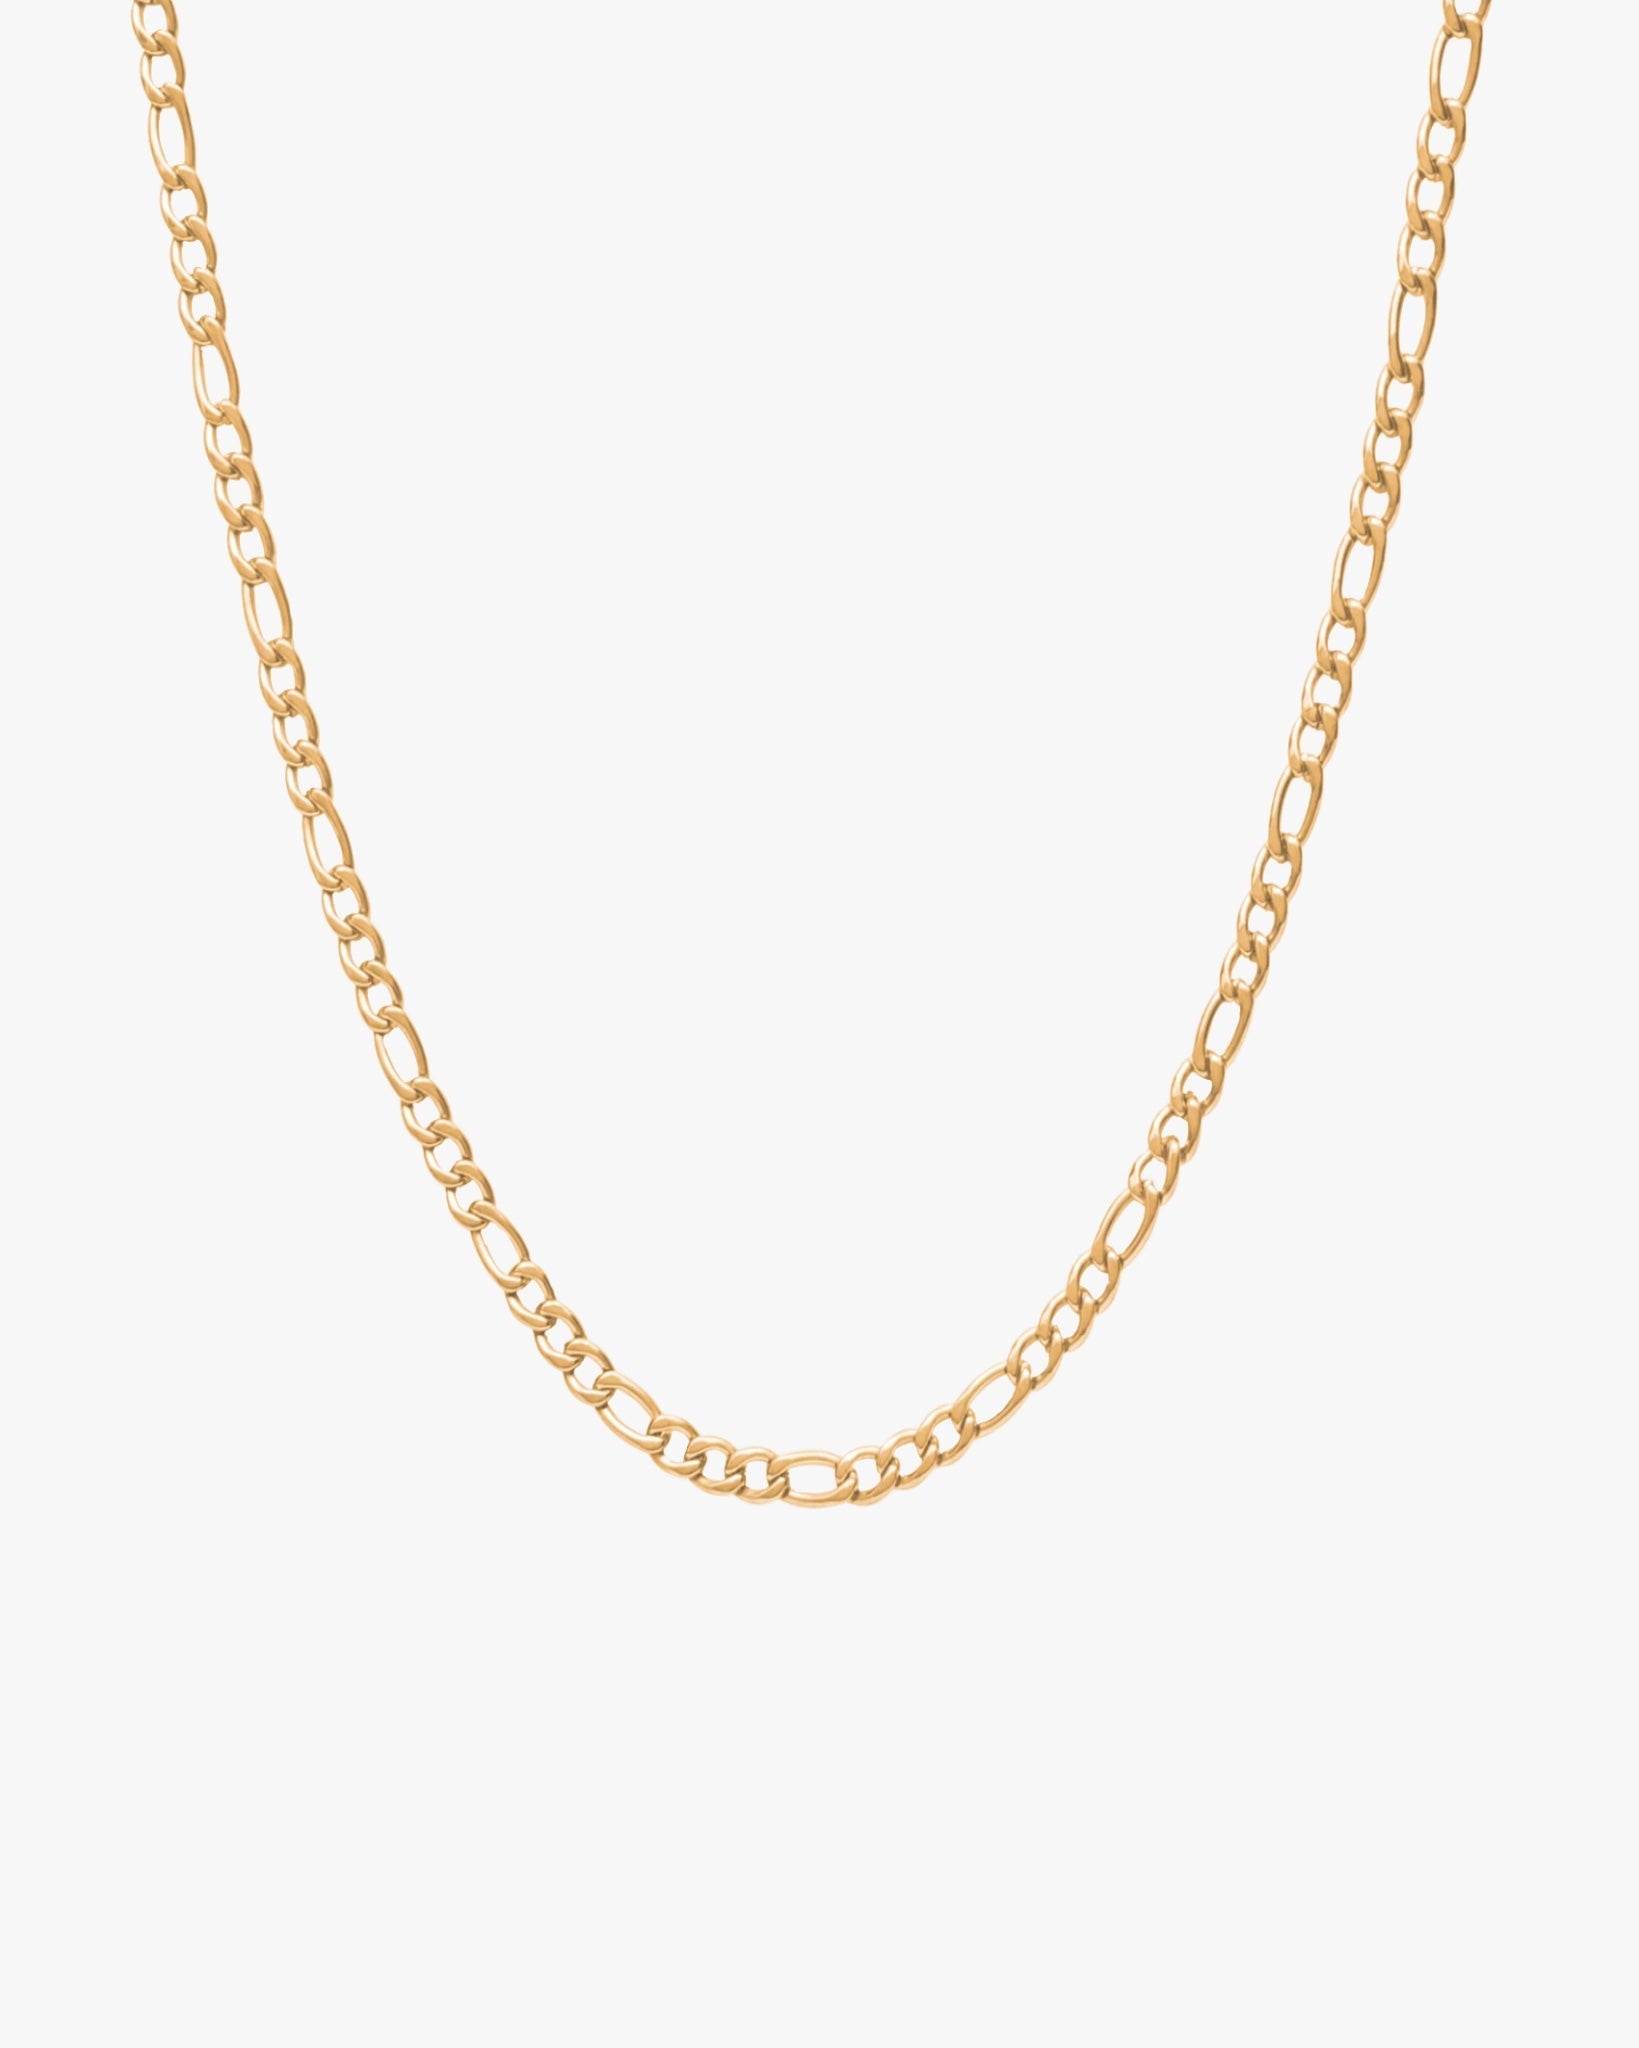 Gold Figaro Chain Necklace (Adjustable Lengths) | VibeSzn